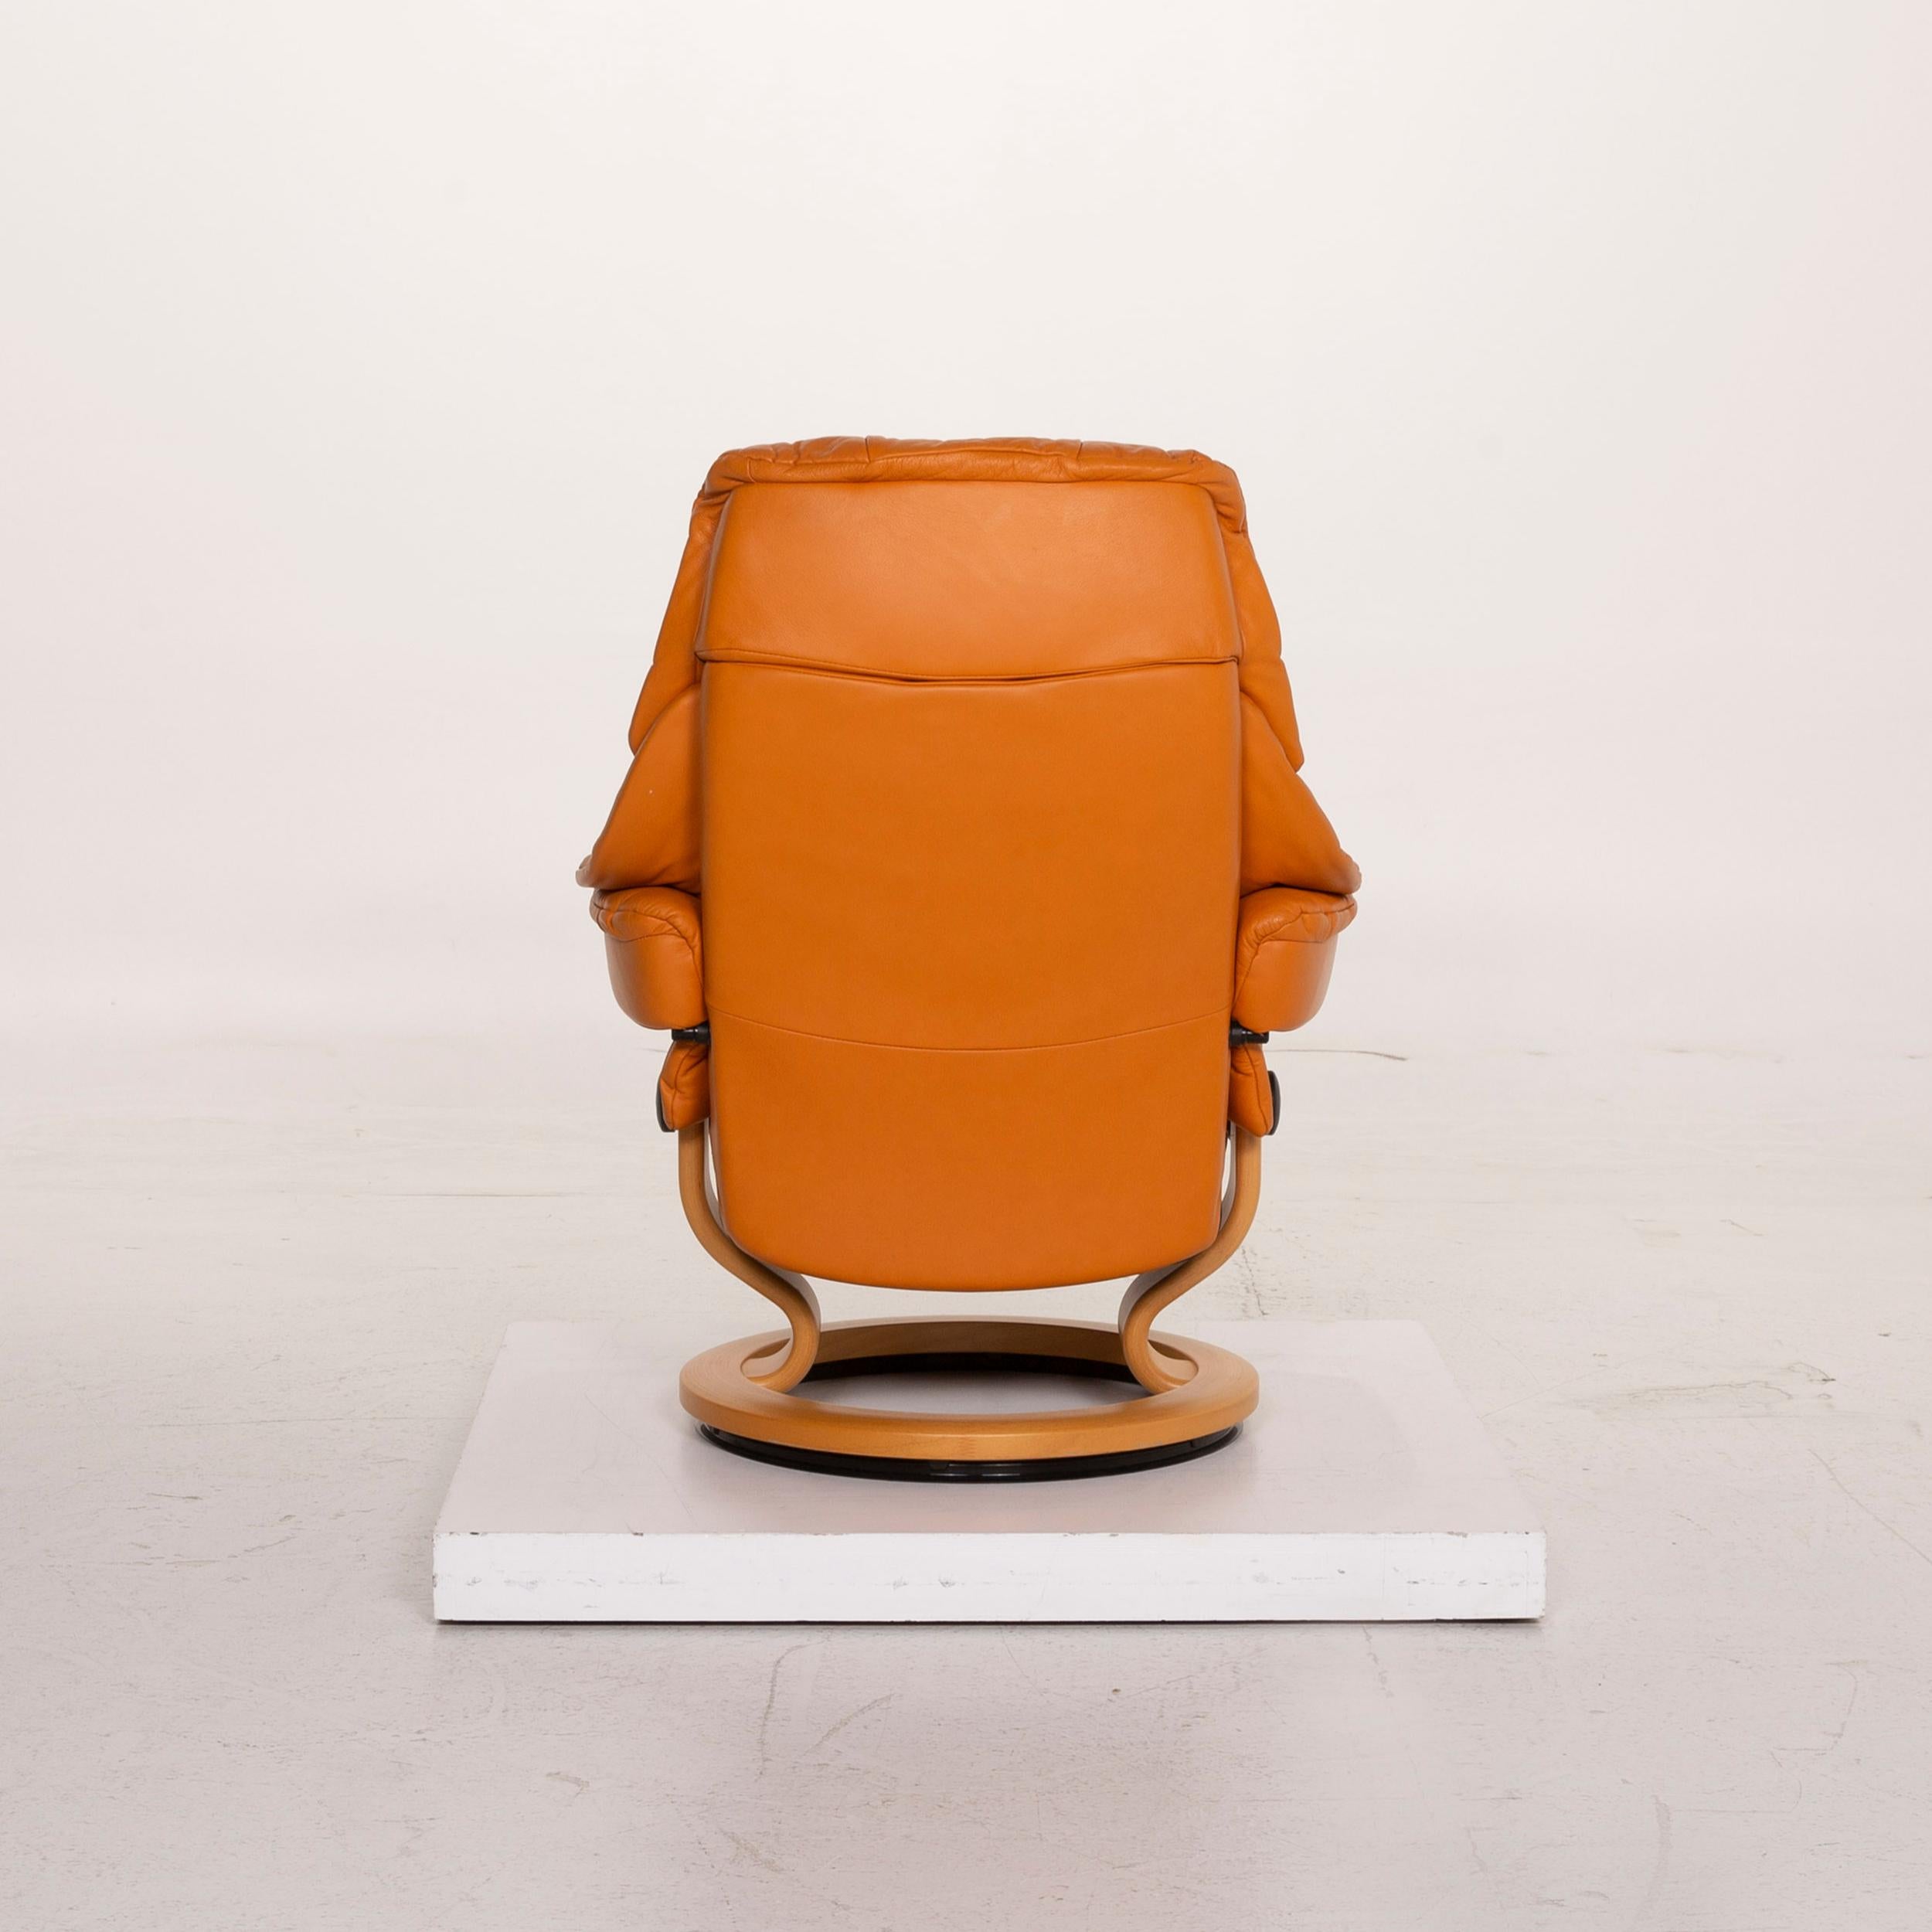 Stressless Reno Leather Armchair Orange Relax Function Incl. Stool 4